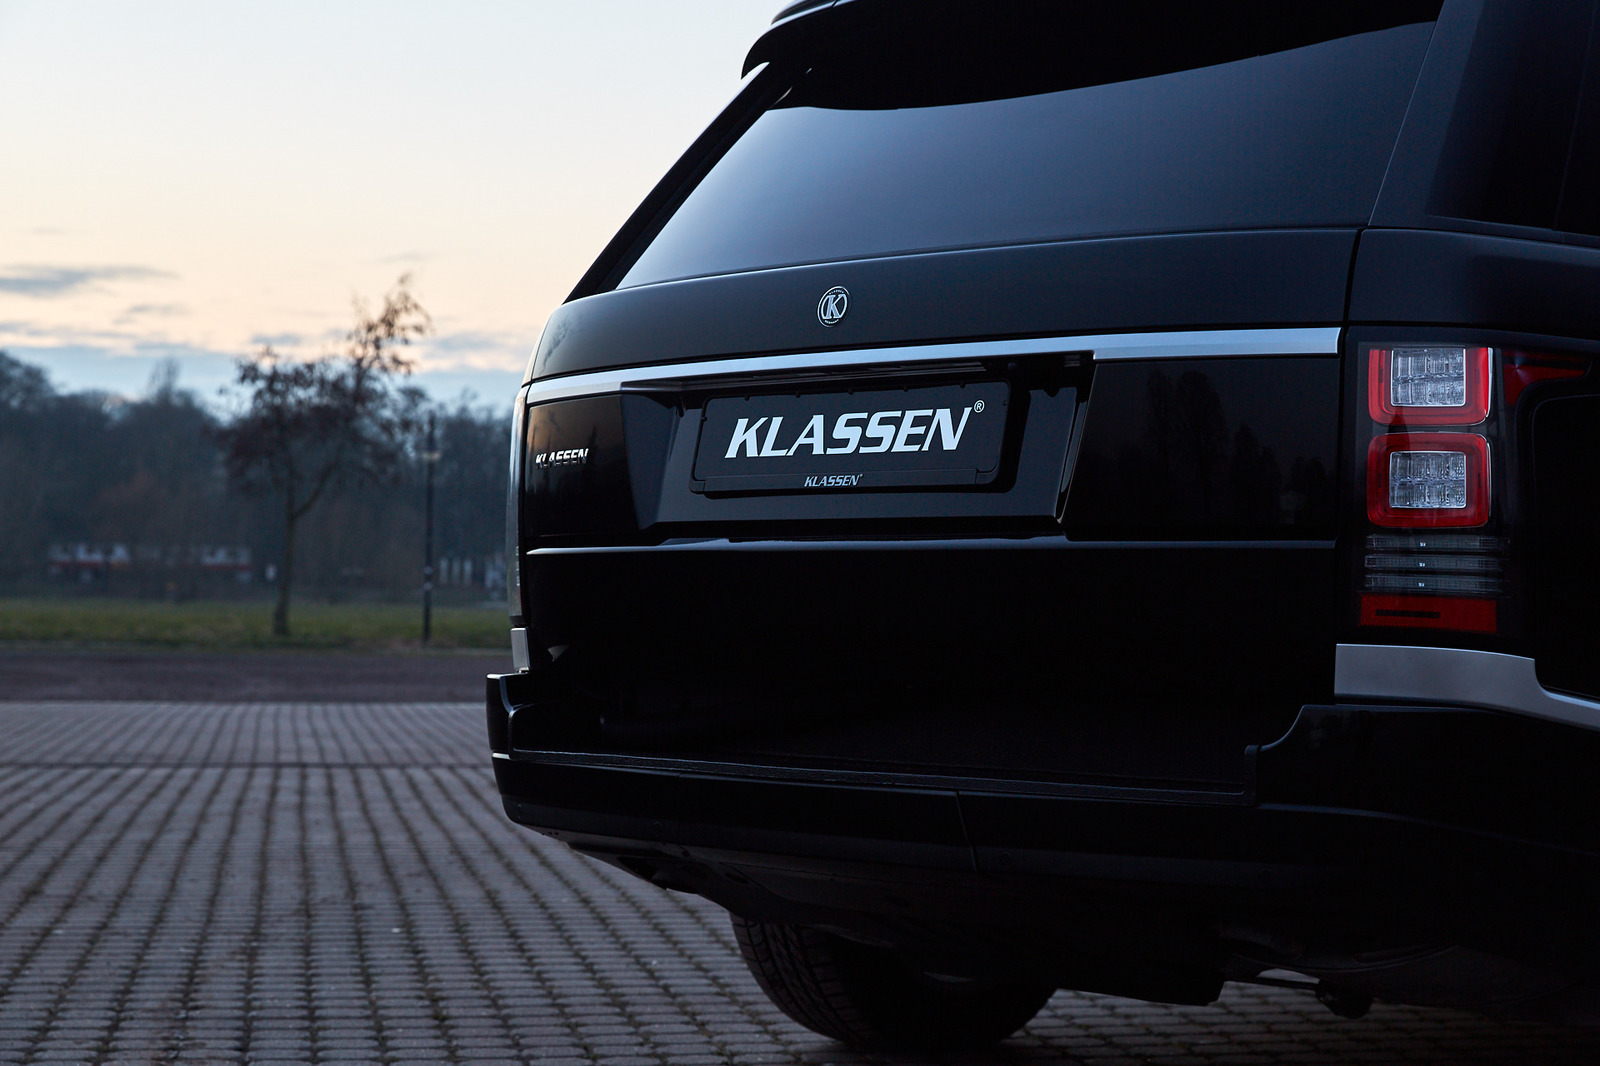 This Stretched Luxury Klassen Range Rover Limo Is Armoured And Made For  Kings And The Wealthy - KLASSEN